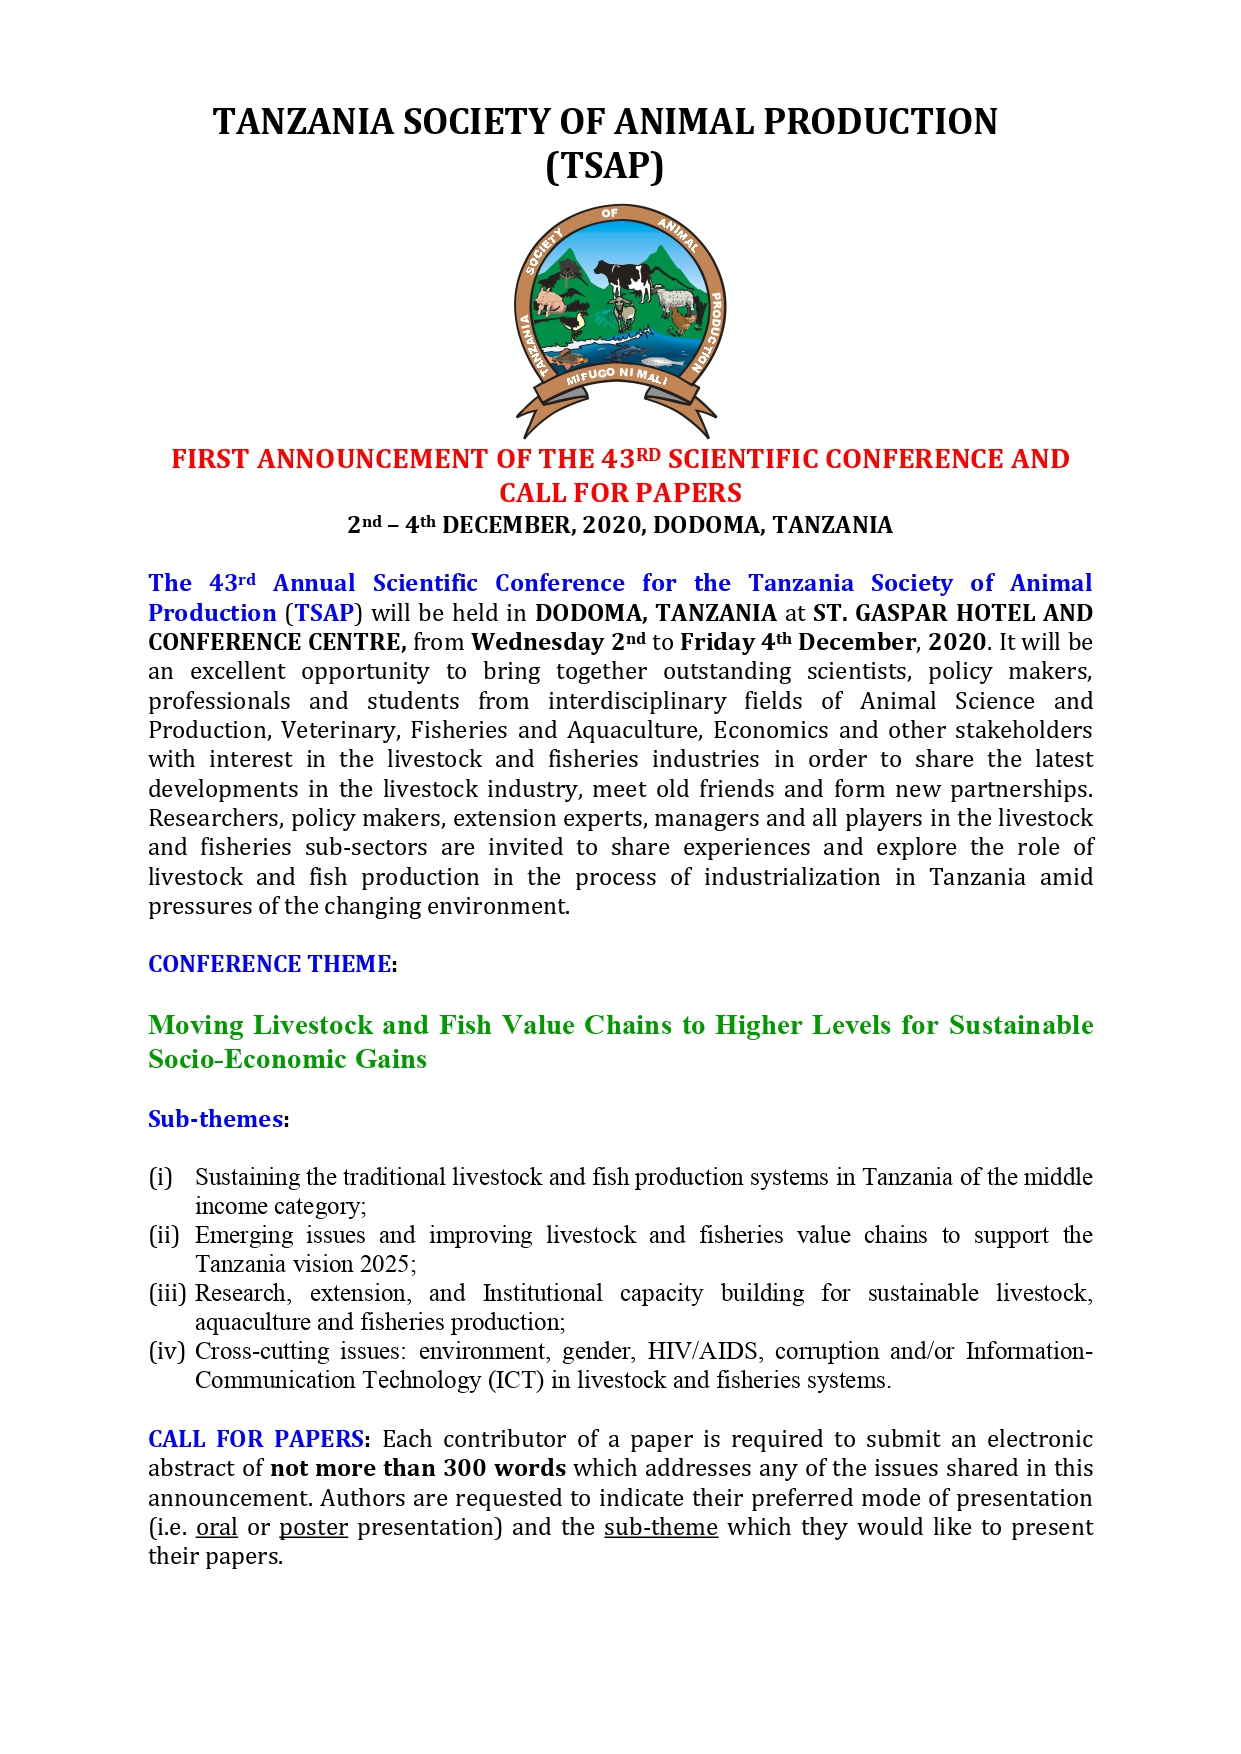 43RD Annual Scientific Conference of TSAP - First Announcement 31.07.2020_page-0001.jpg